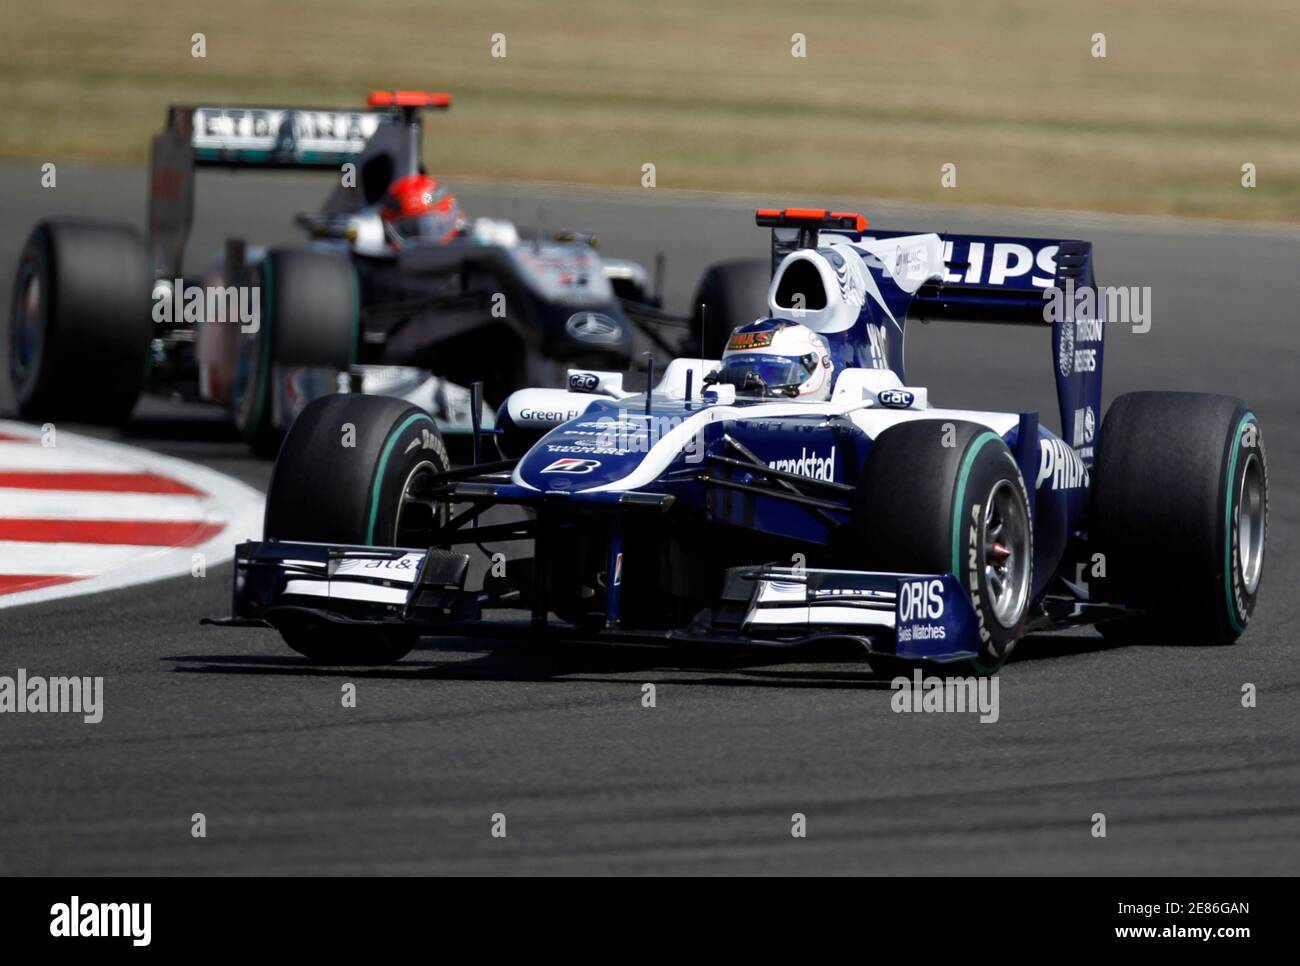 Williams Formula One driver Rubens Barrichello of Brazil leads Mercedes  Michael Schumacher of Germany during the